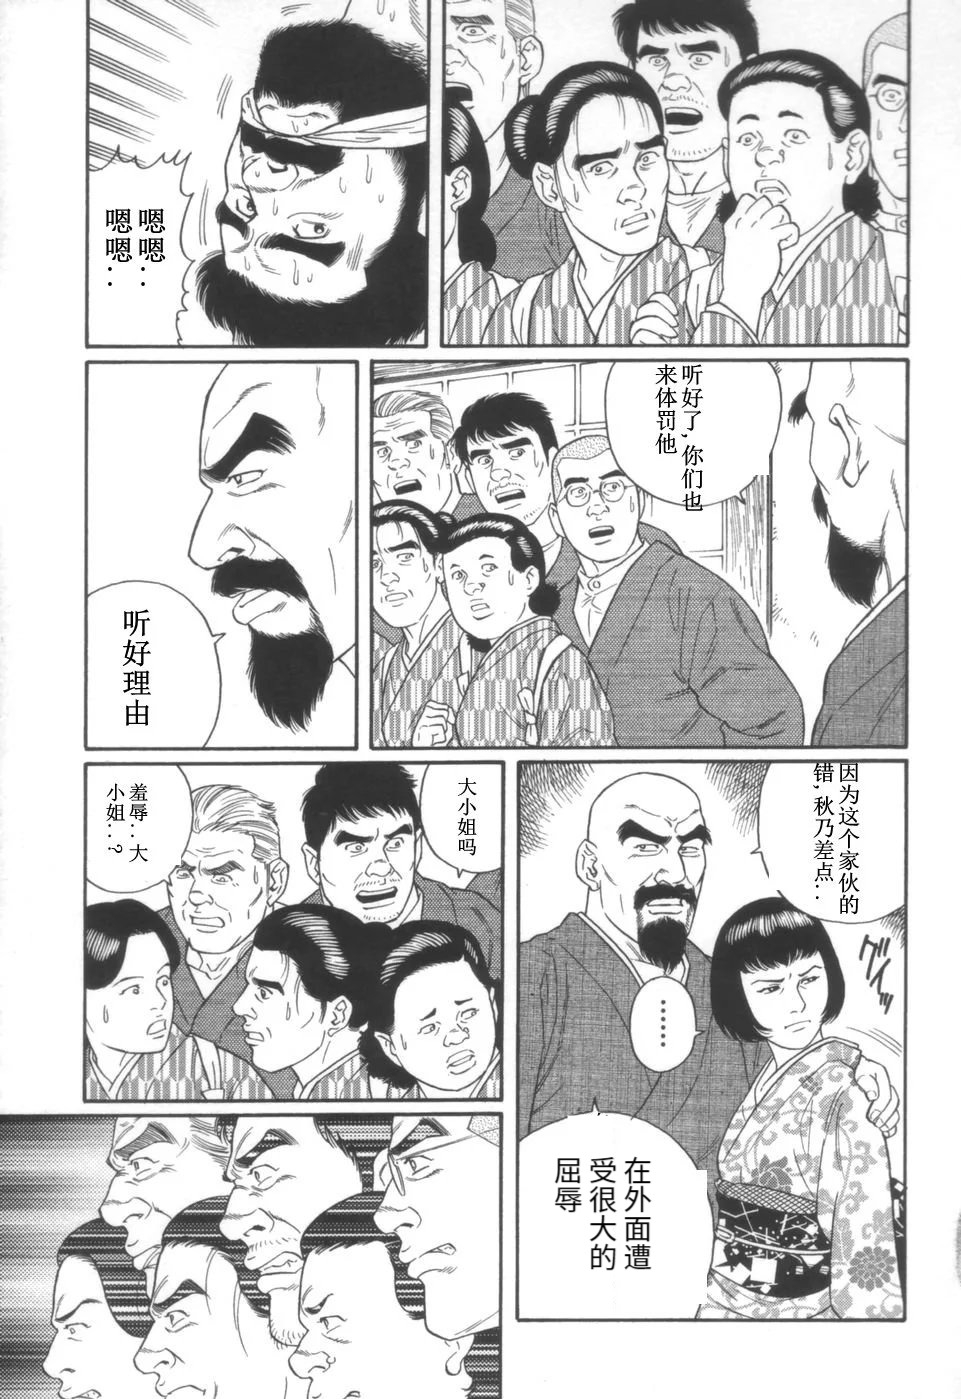 [Tagame Gengoroh] Gedou no Ie Joukan | 邪道之家 Vol. 1 Ch.5 [Chinese] 24